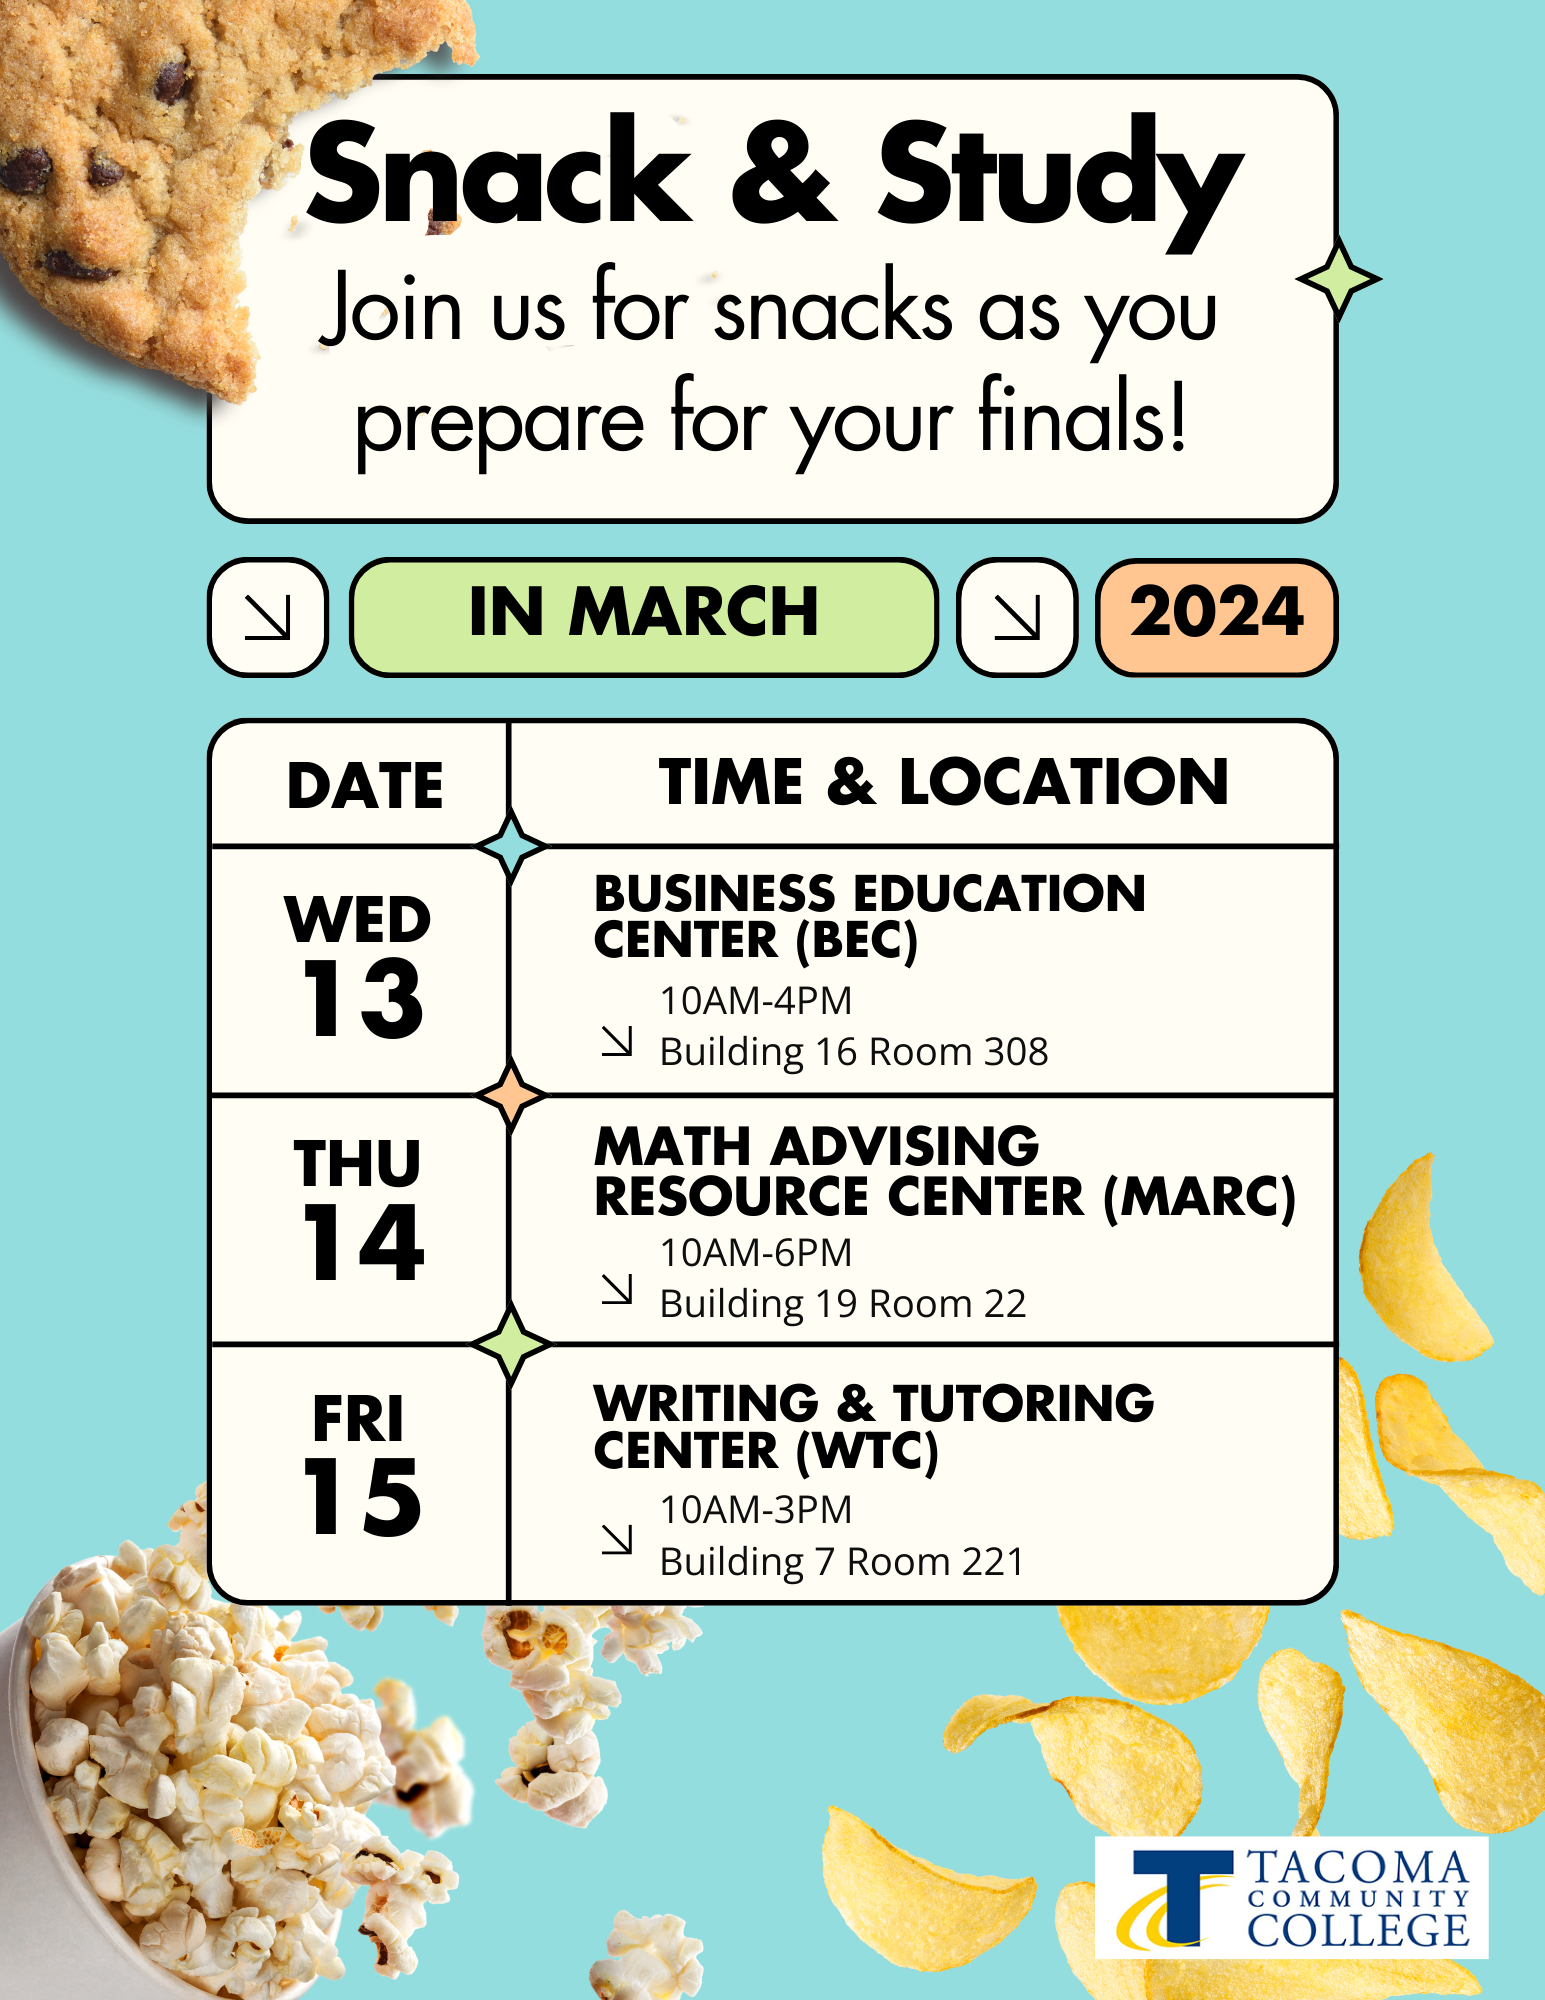 picture of popcorn and the study schedule for march 13, 10a-4p in the BEC, March 14, 10a - 6p in the MARC, and March 15, 10a - 3p in the WTC 